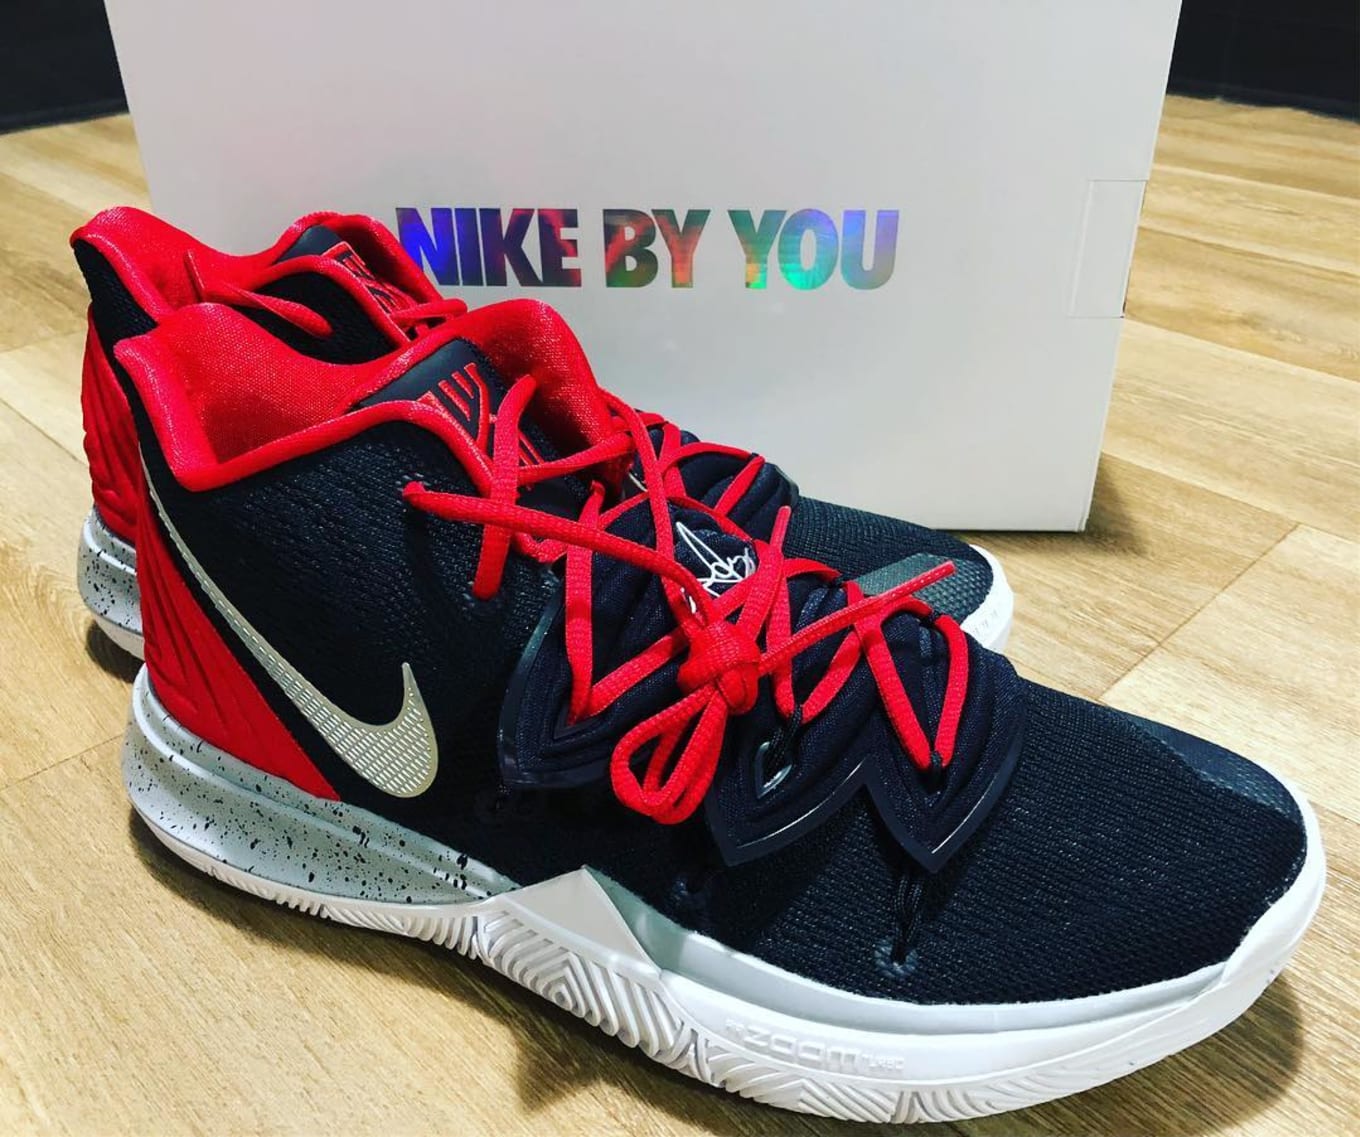 nike by you kyrie 5